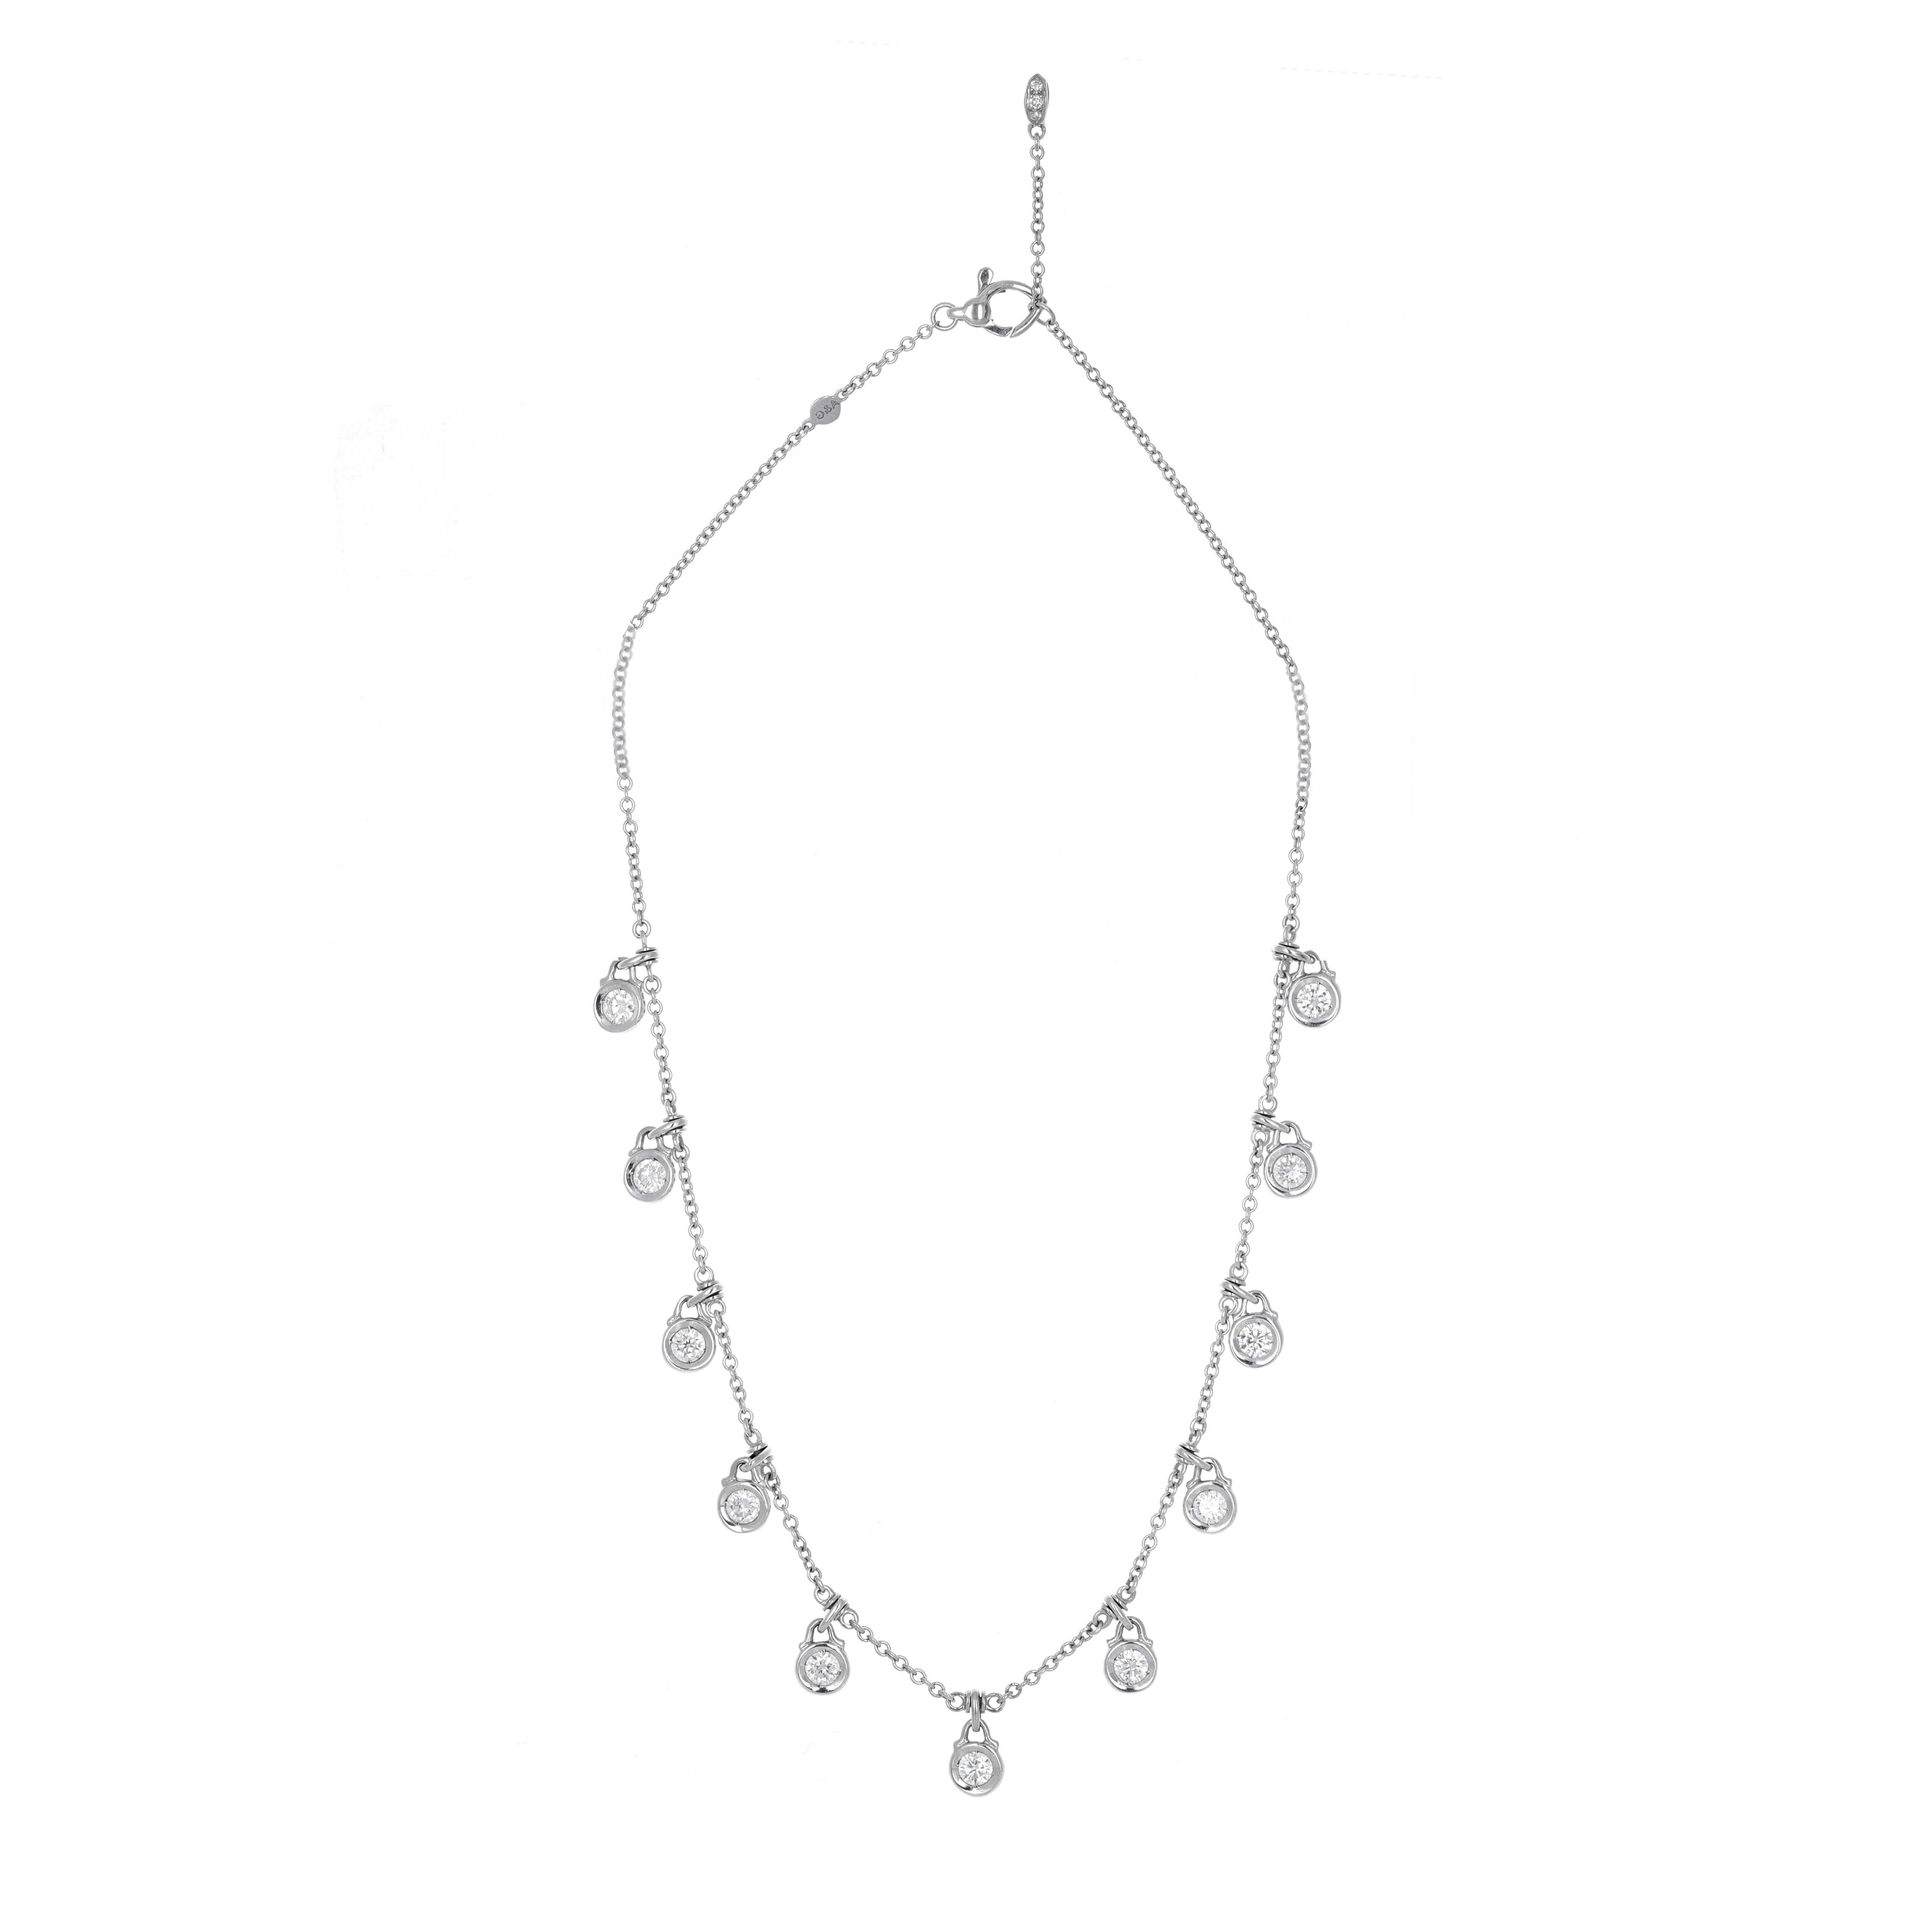 18 karat white gold diamond drop necklace. This necklace has 11 round brilliant white diamonds weighing a total of 1.70 carats. Each diamond is bezel set and has movement. The necklace can be worn 15 or 16 inches.